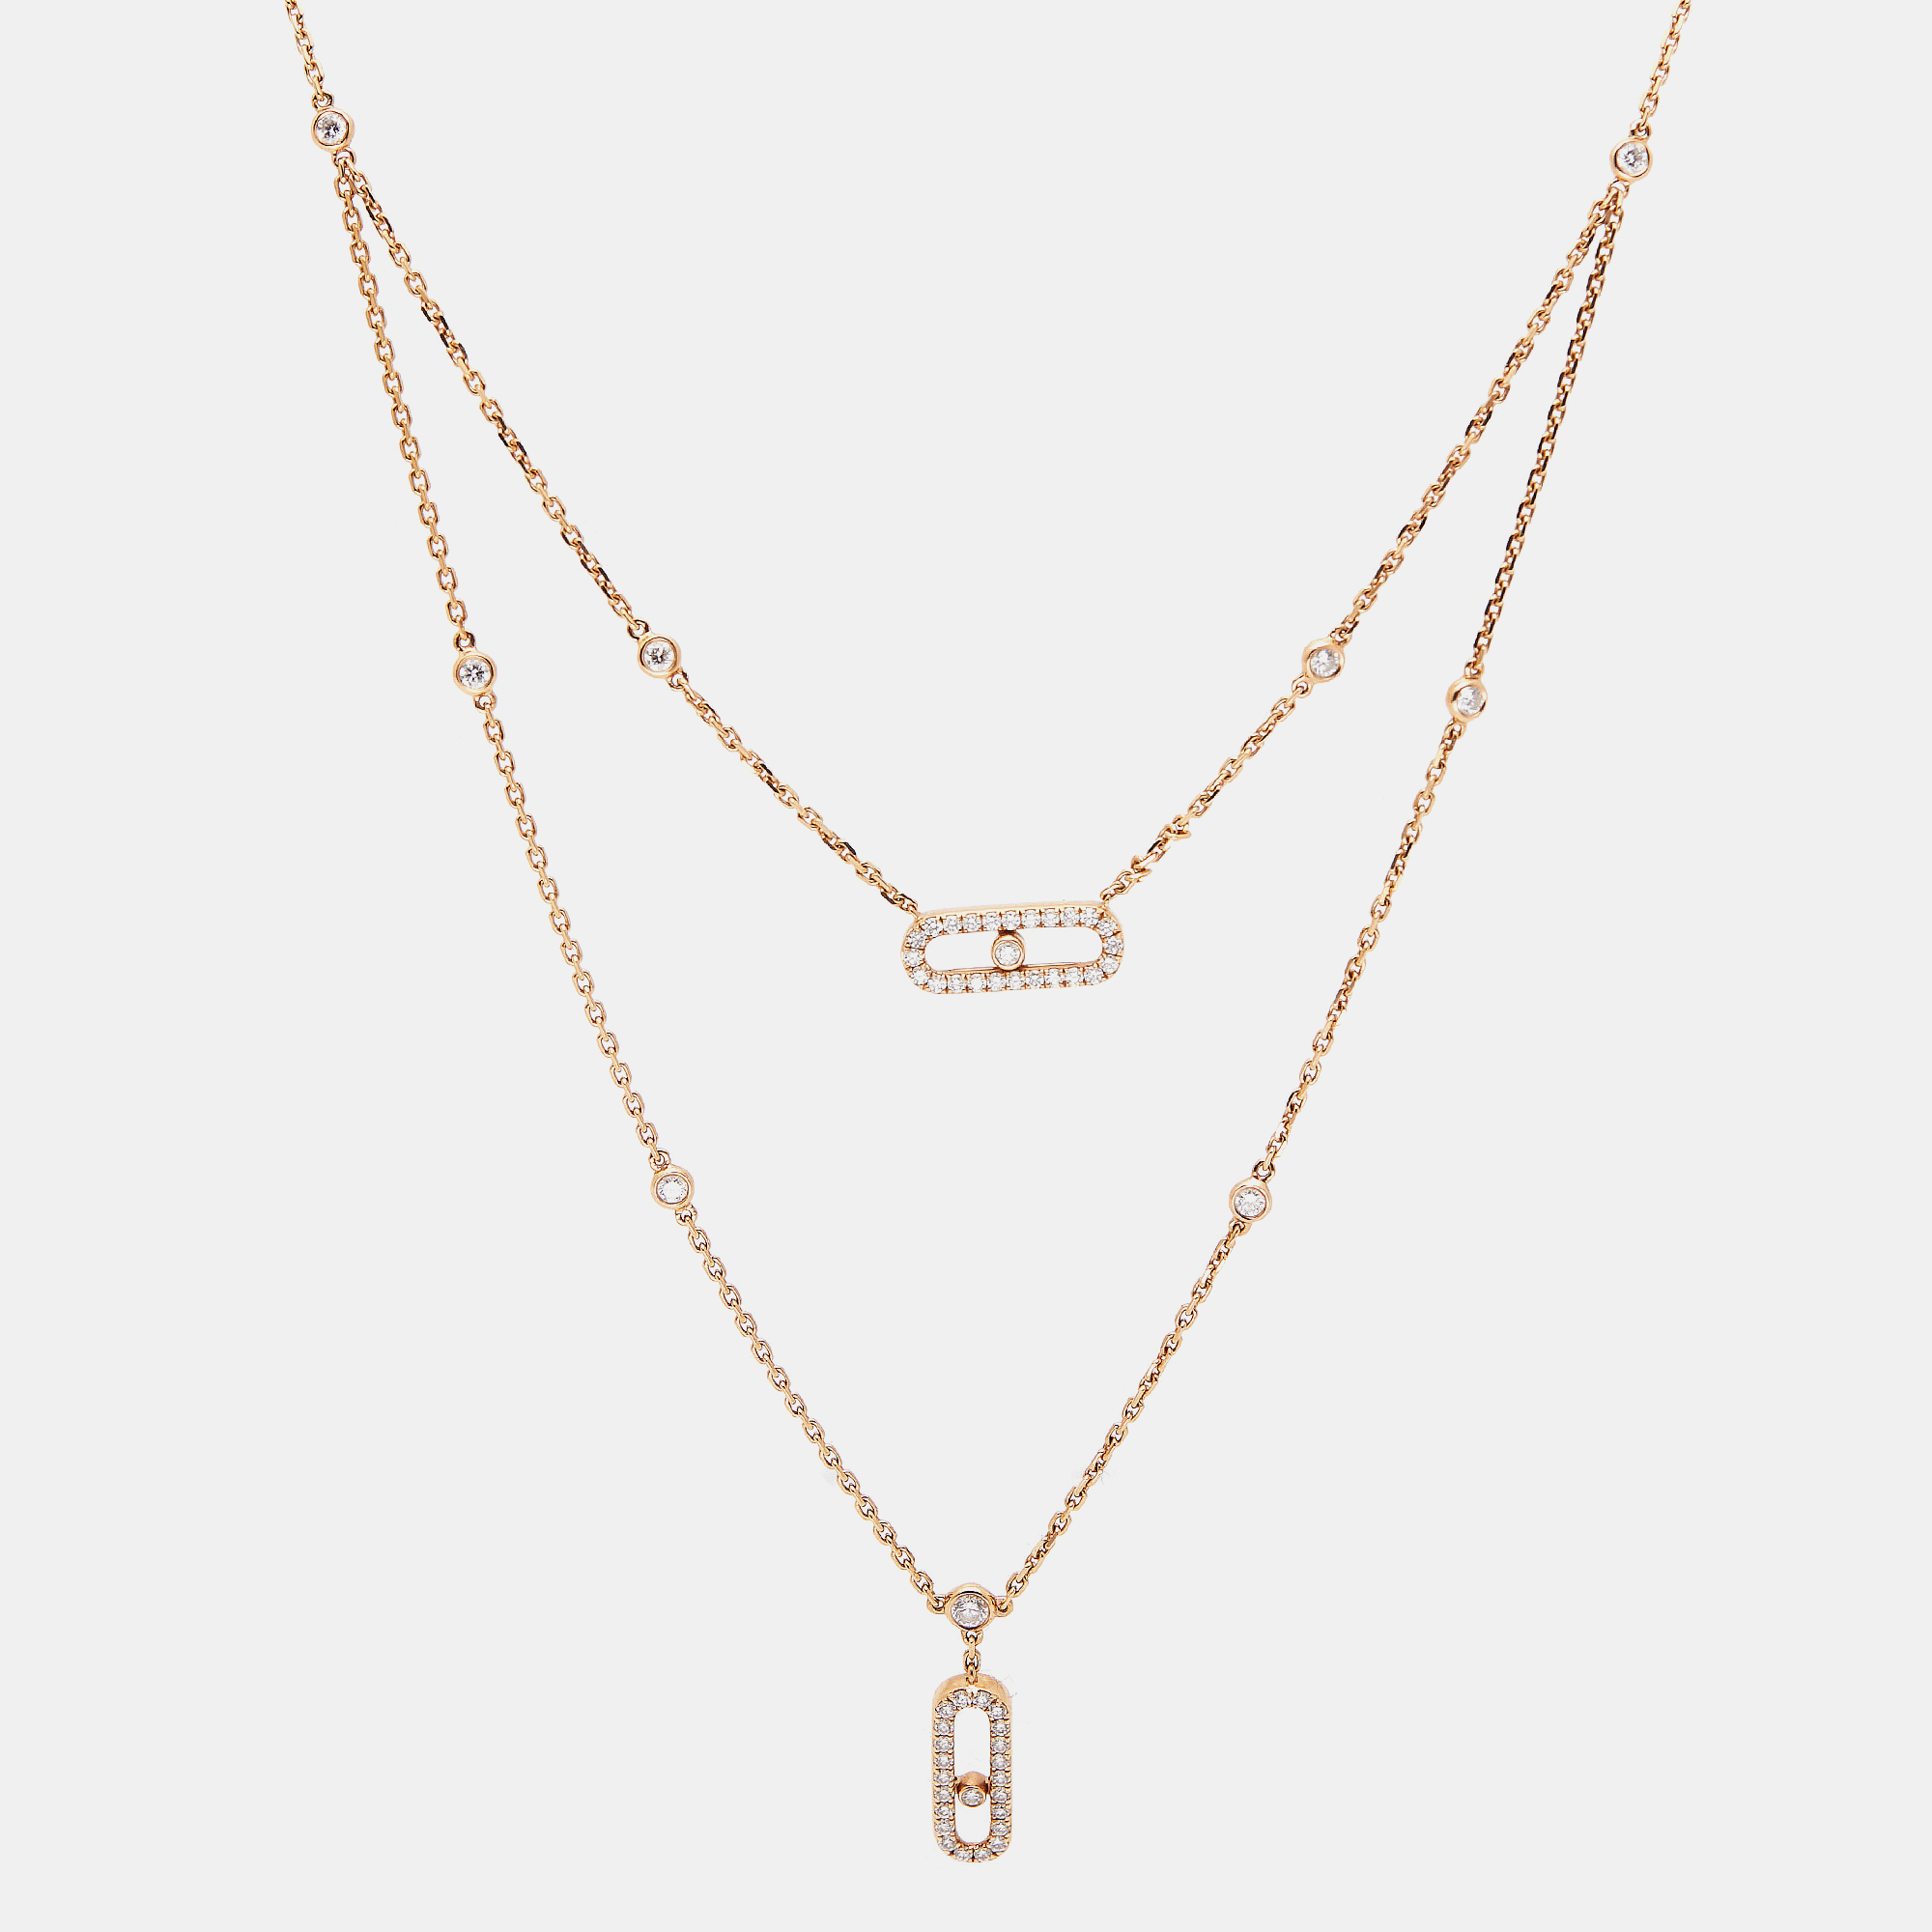 Messika move uno 2 rows pave diamond 18k rose gold necklace